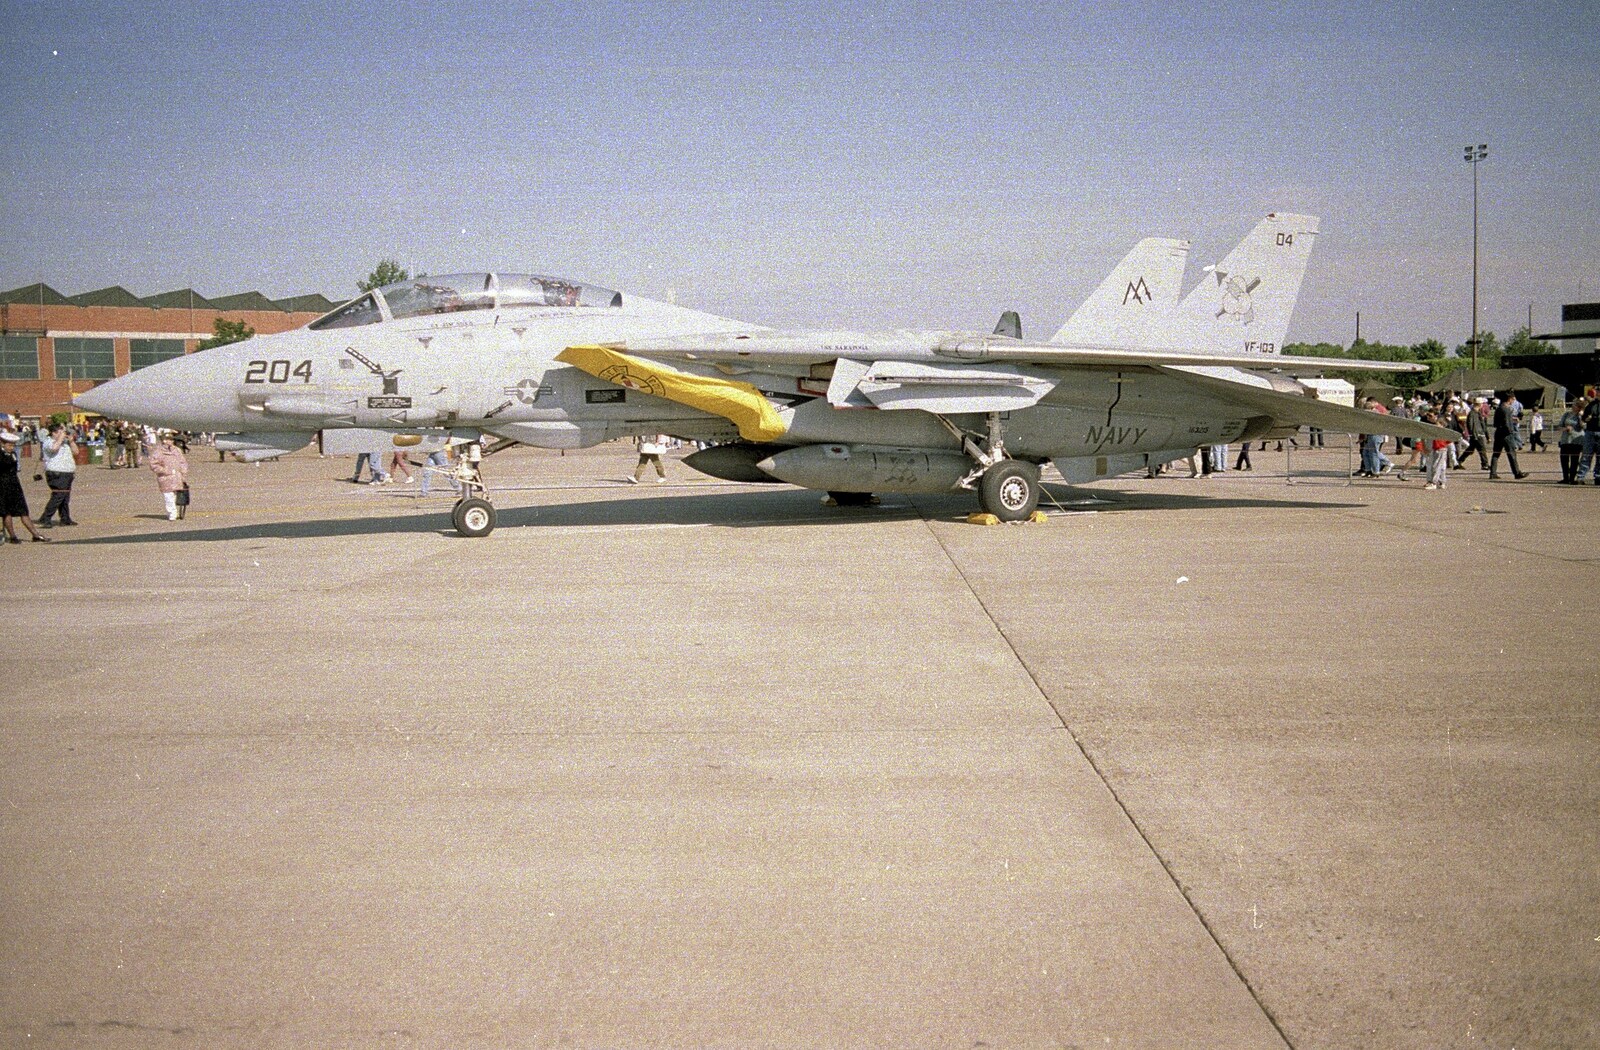 A US Navy F-15 from The Mildenhall Air Fete, Mildenhall, Suffolk - 29th May 1994